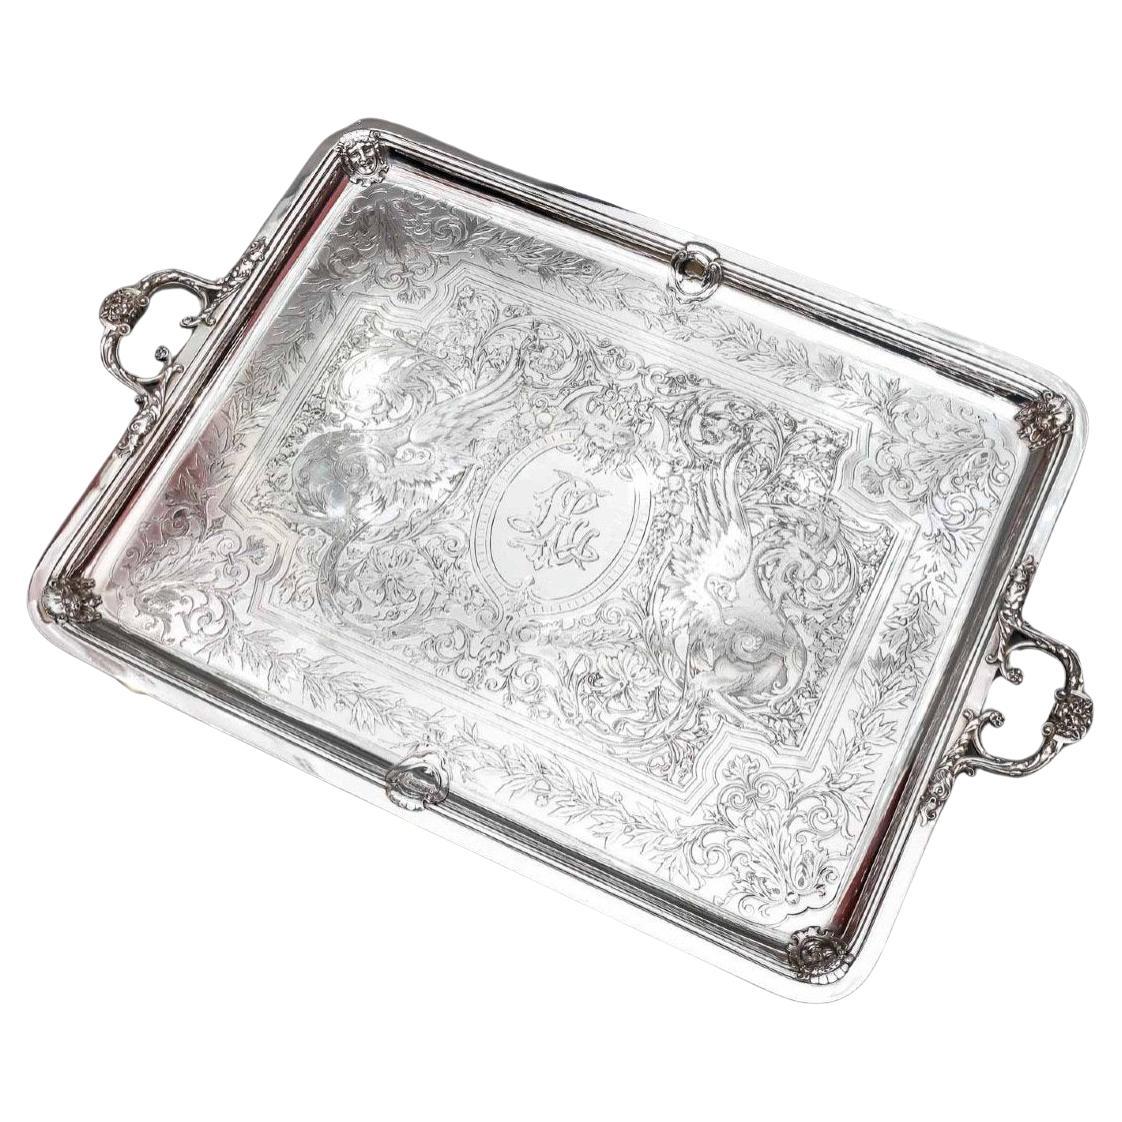 J. Piault – large 19th century solid silver serving tray